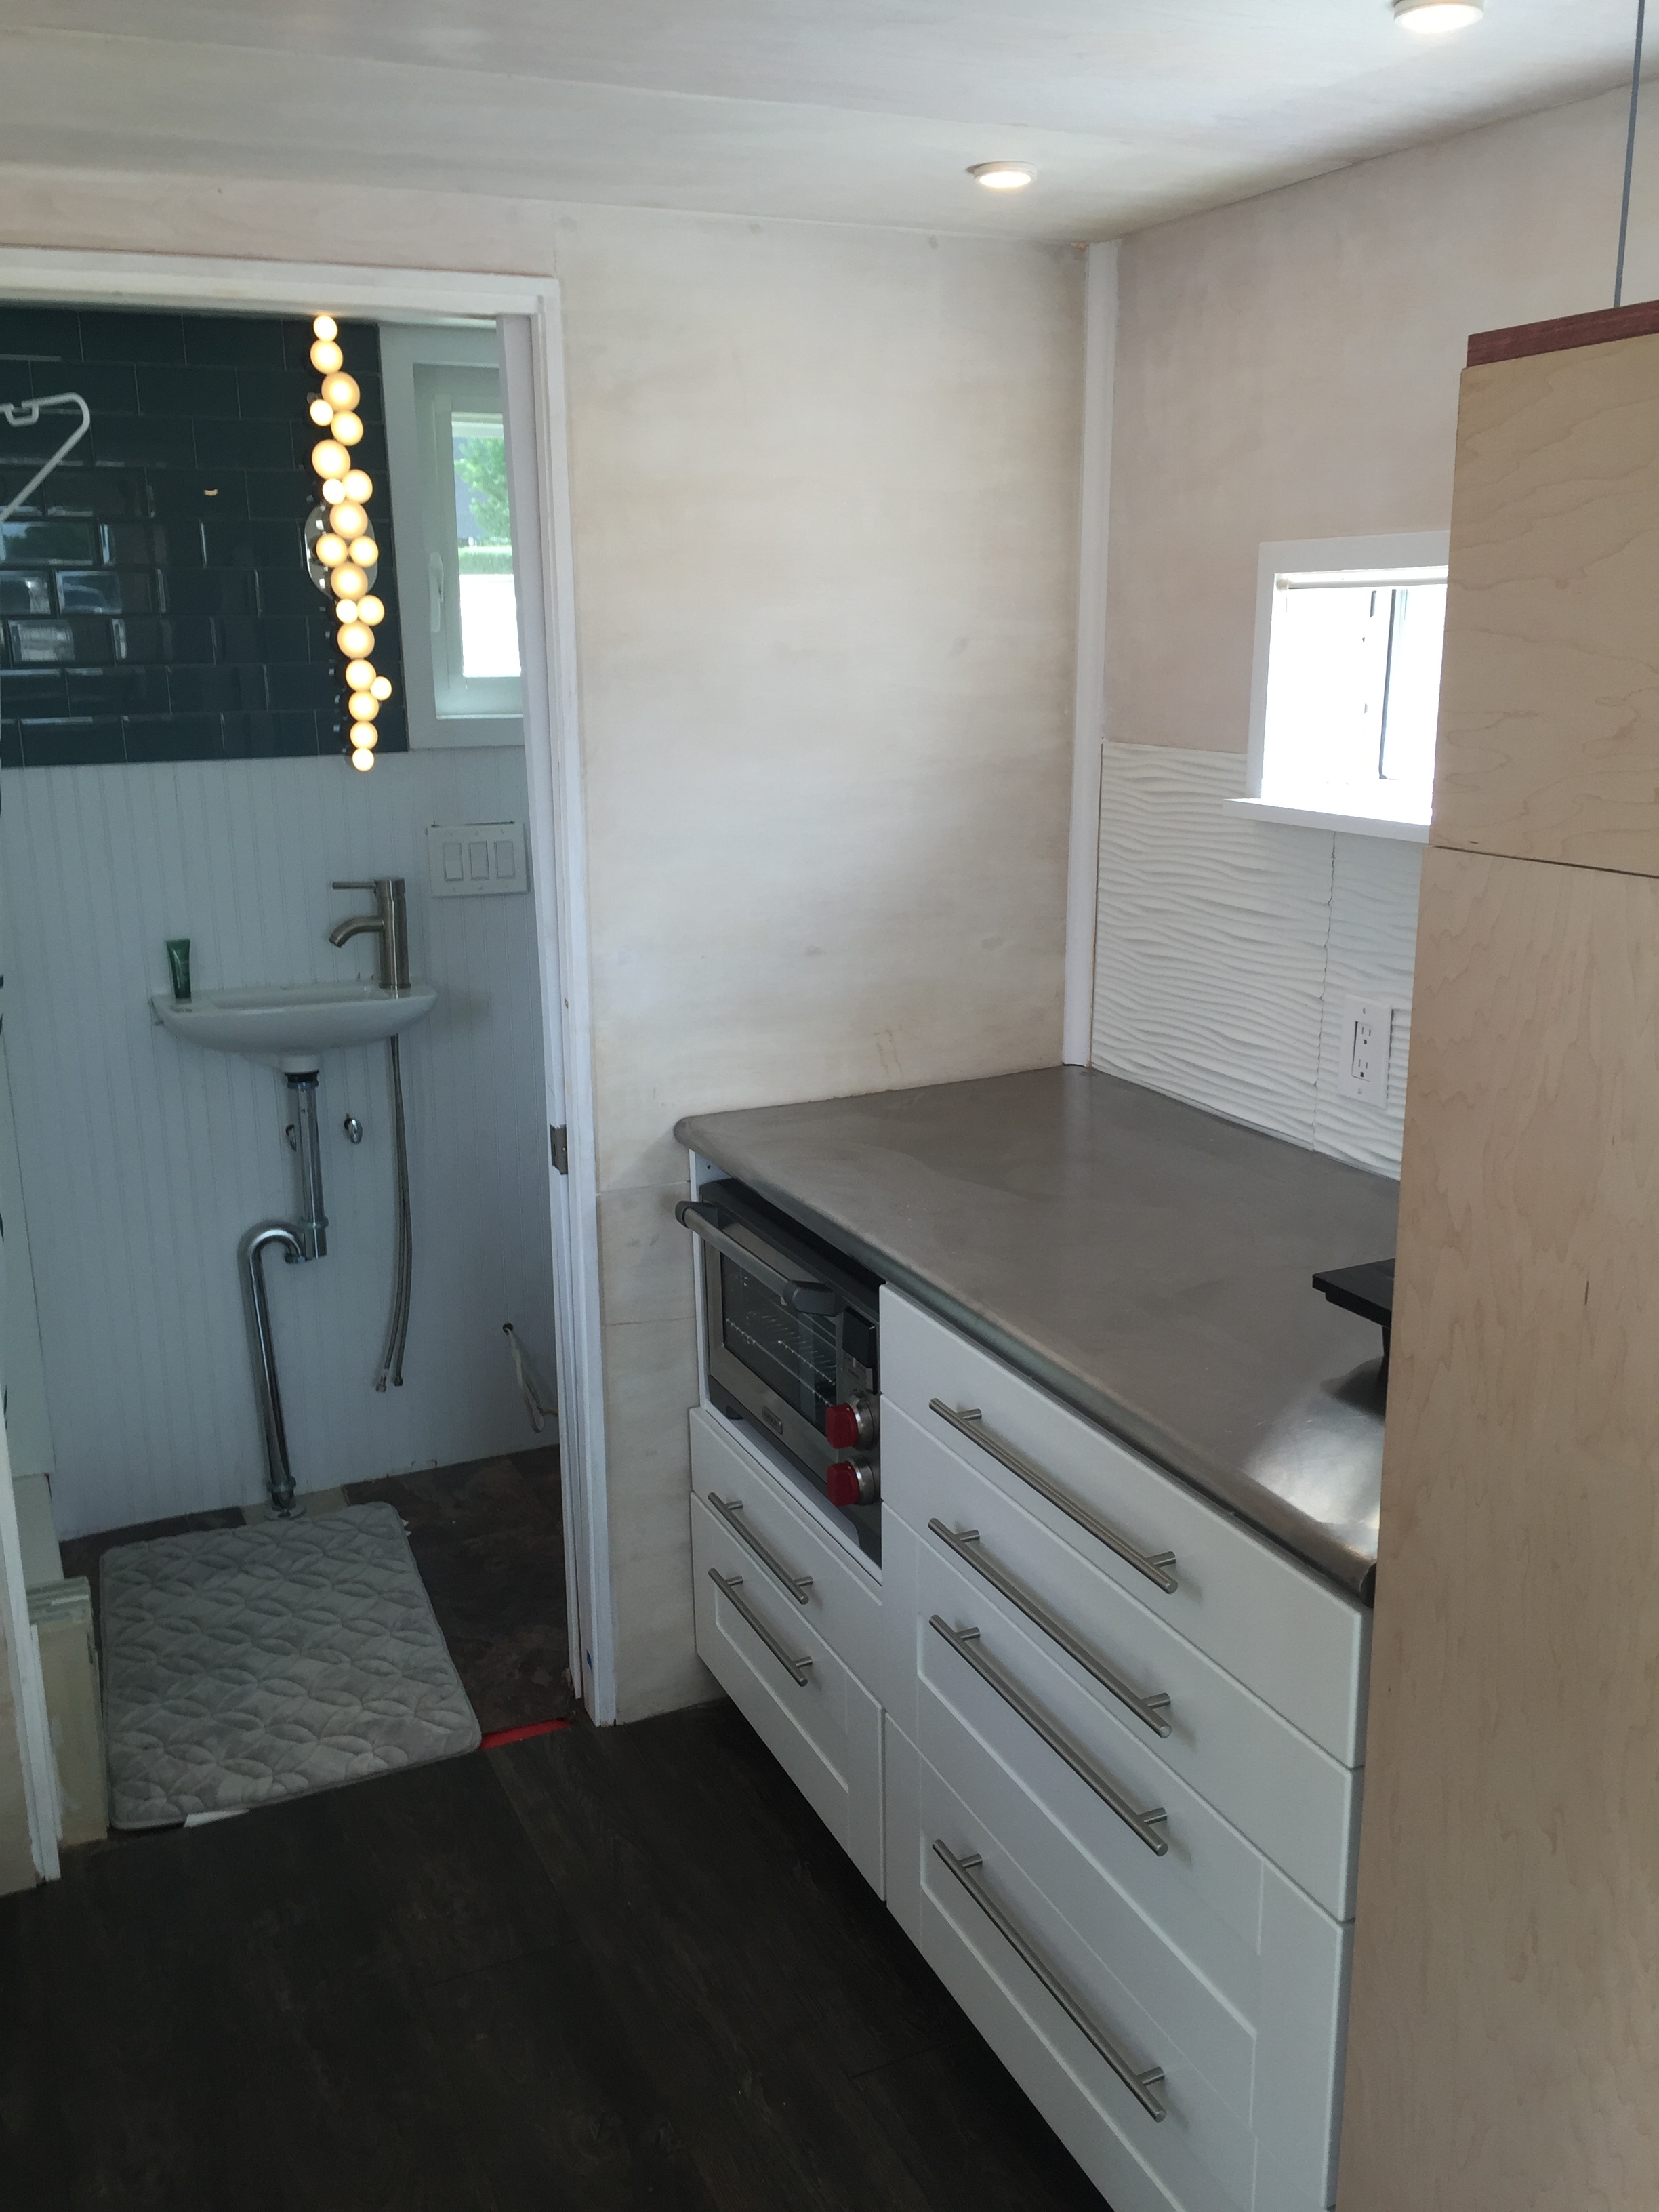 using ikea cabinets in a tiny house: an in-depth review